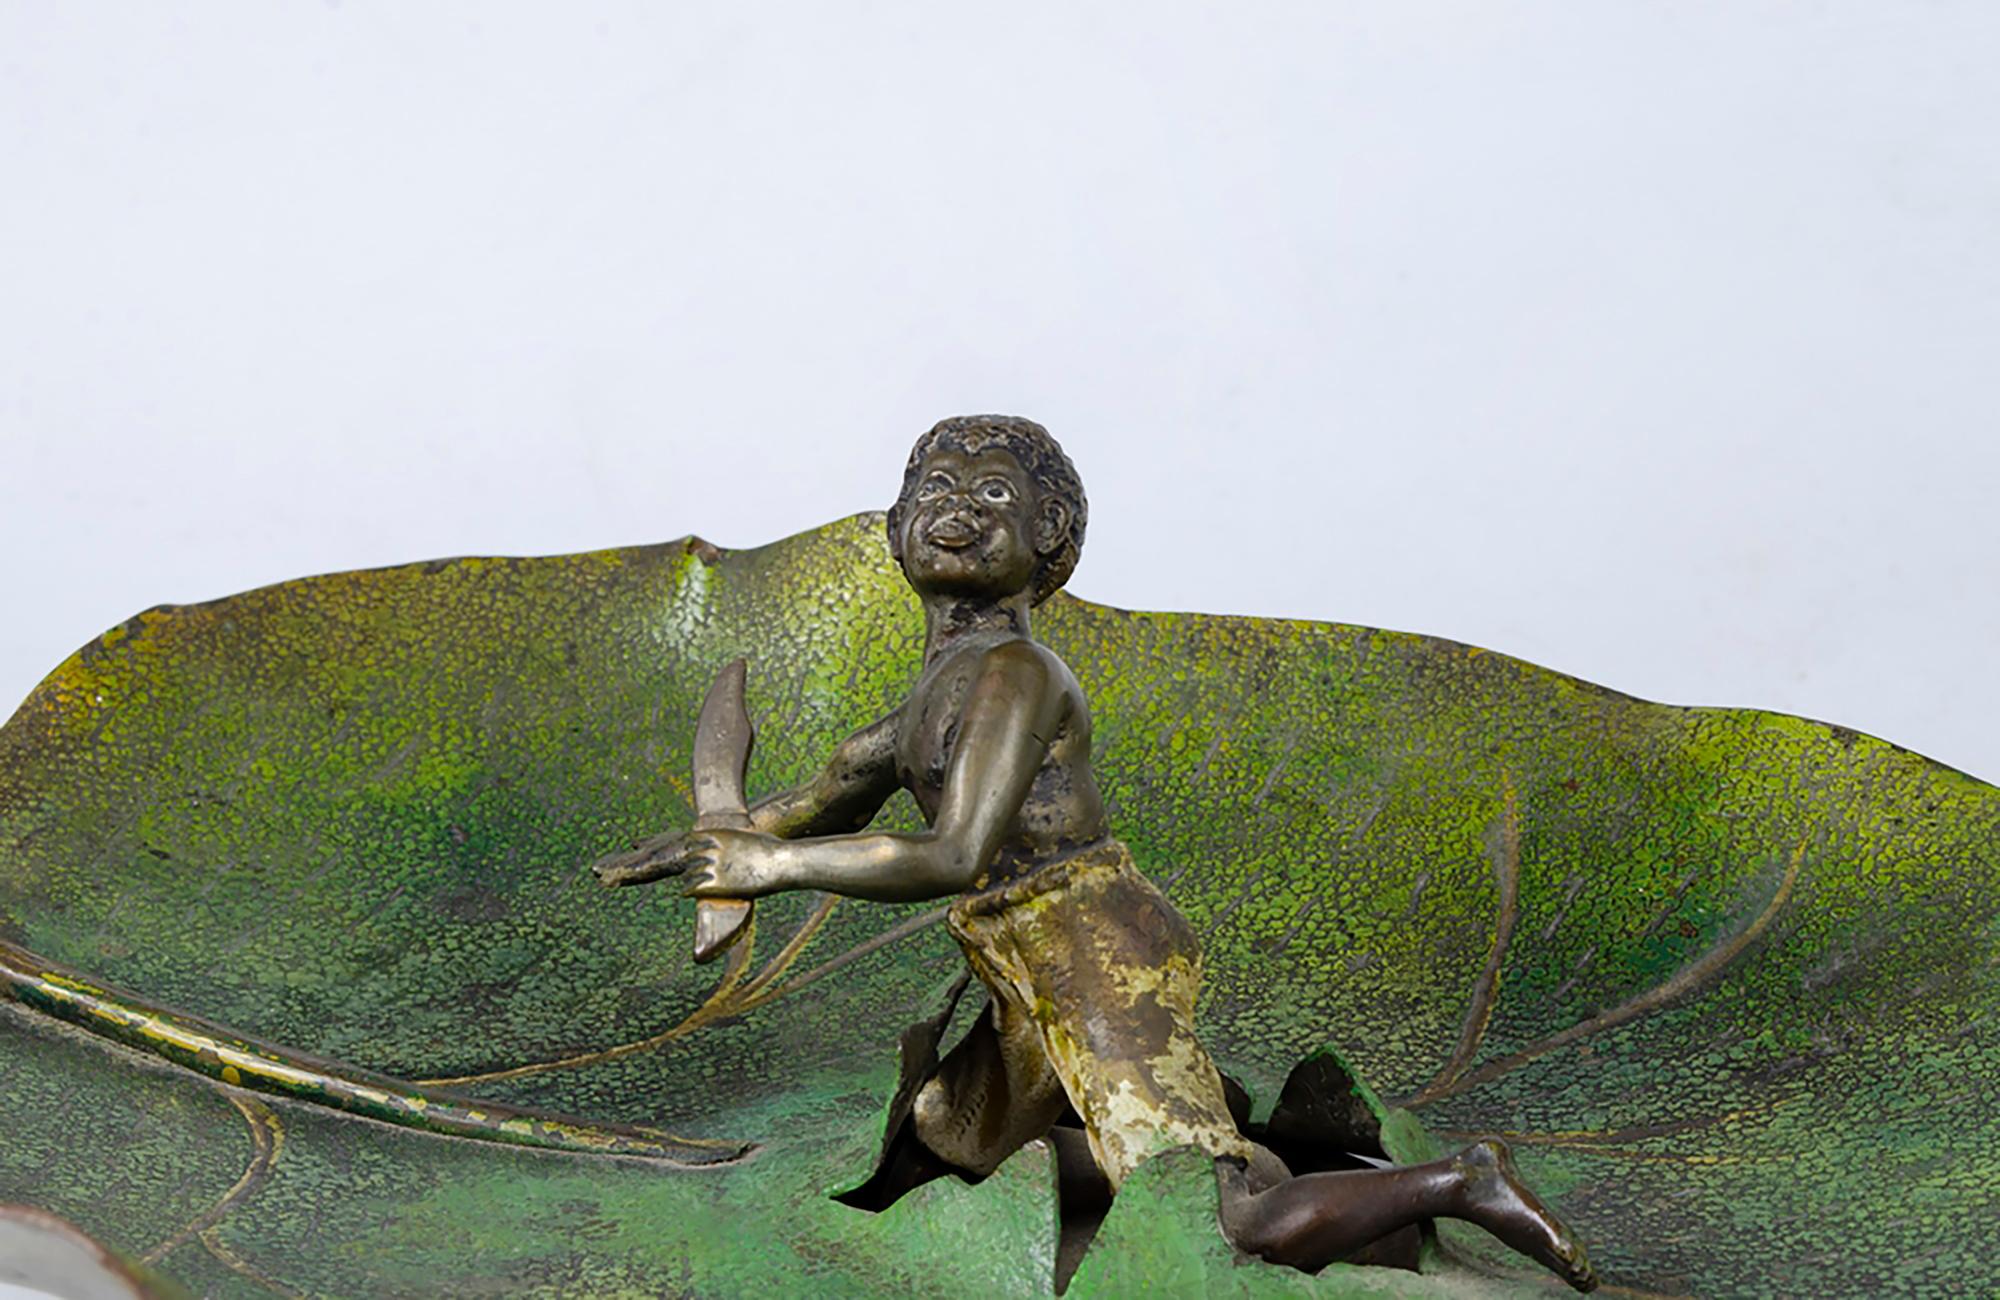 Antique Austrian Cold-Painted Bronze
Boy on a leaf, 20th century

Measures:
44 centimeters long
20,5 centimeters depth
11 centimeters high

This antique cast and cold-painted bronze sculpture is unsigned but presumed to have been made in Austria in